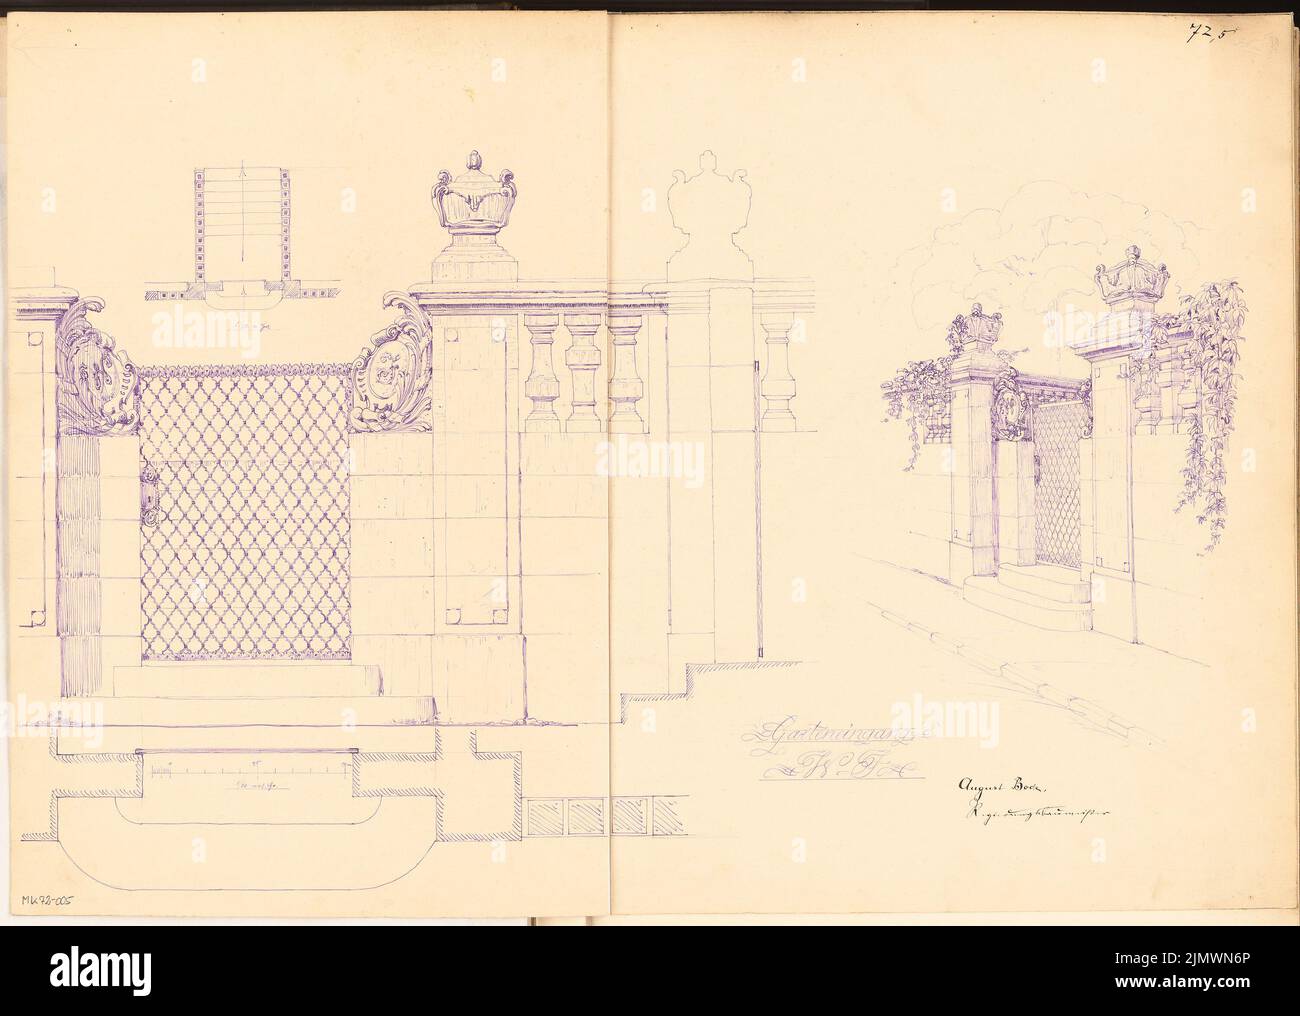 Bode August (born 1874), garden entrance in feed wall. Monthly competition November 1907 (11.1907): floor plan, outline front view 1:10; perspective view; Scale bar. Ink on cardboard, 52.4 x 73.5 cm (including scan edges) Bode August  (geb. 1874): Garteneingang in Futtermauer. Monatskonkurrenz November 1907 Stock Photo